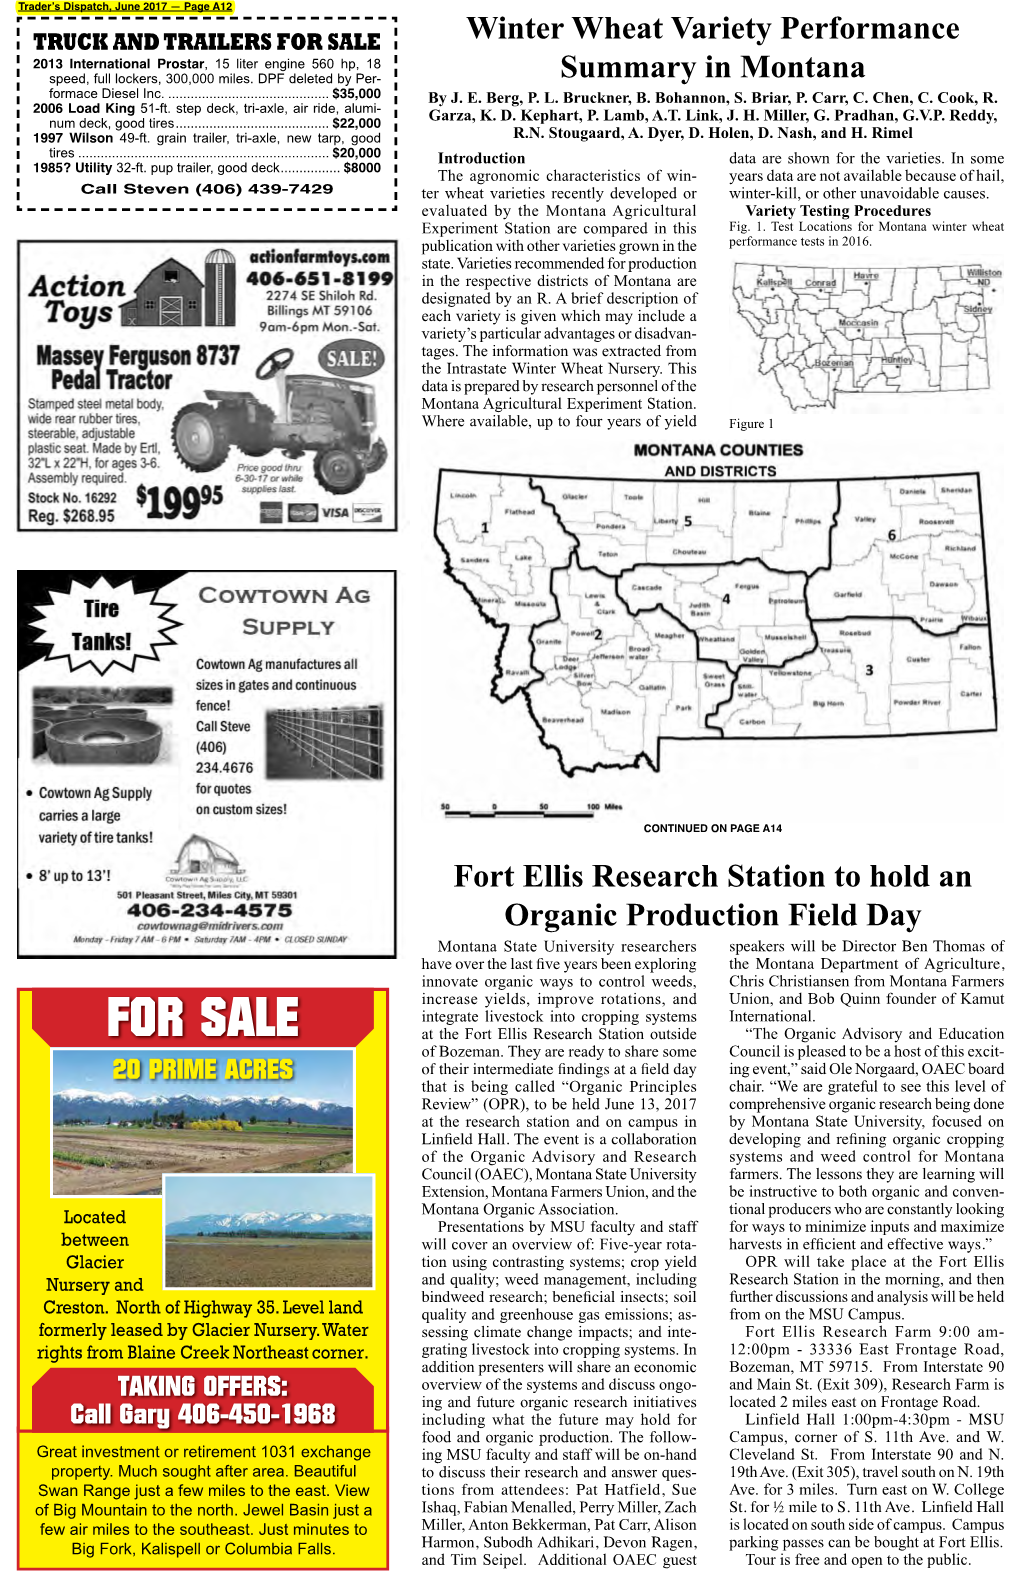 Winter Wheat Variety Performance Summary in Montana ~WANTED~ CONTINUED from PAGE A12 All Types of Hay to Bale on Shares